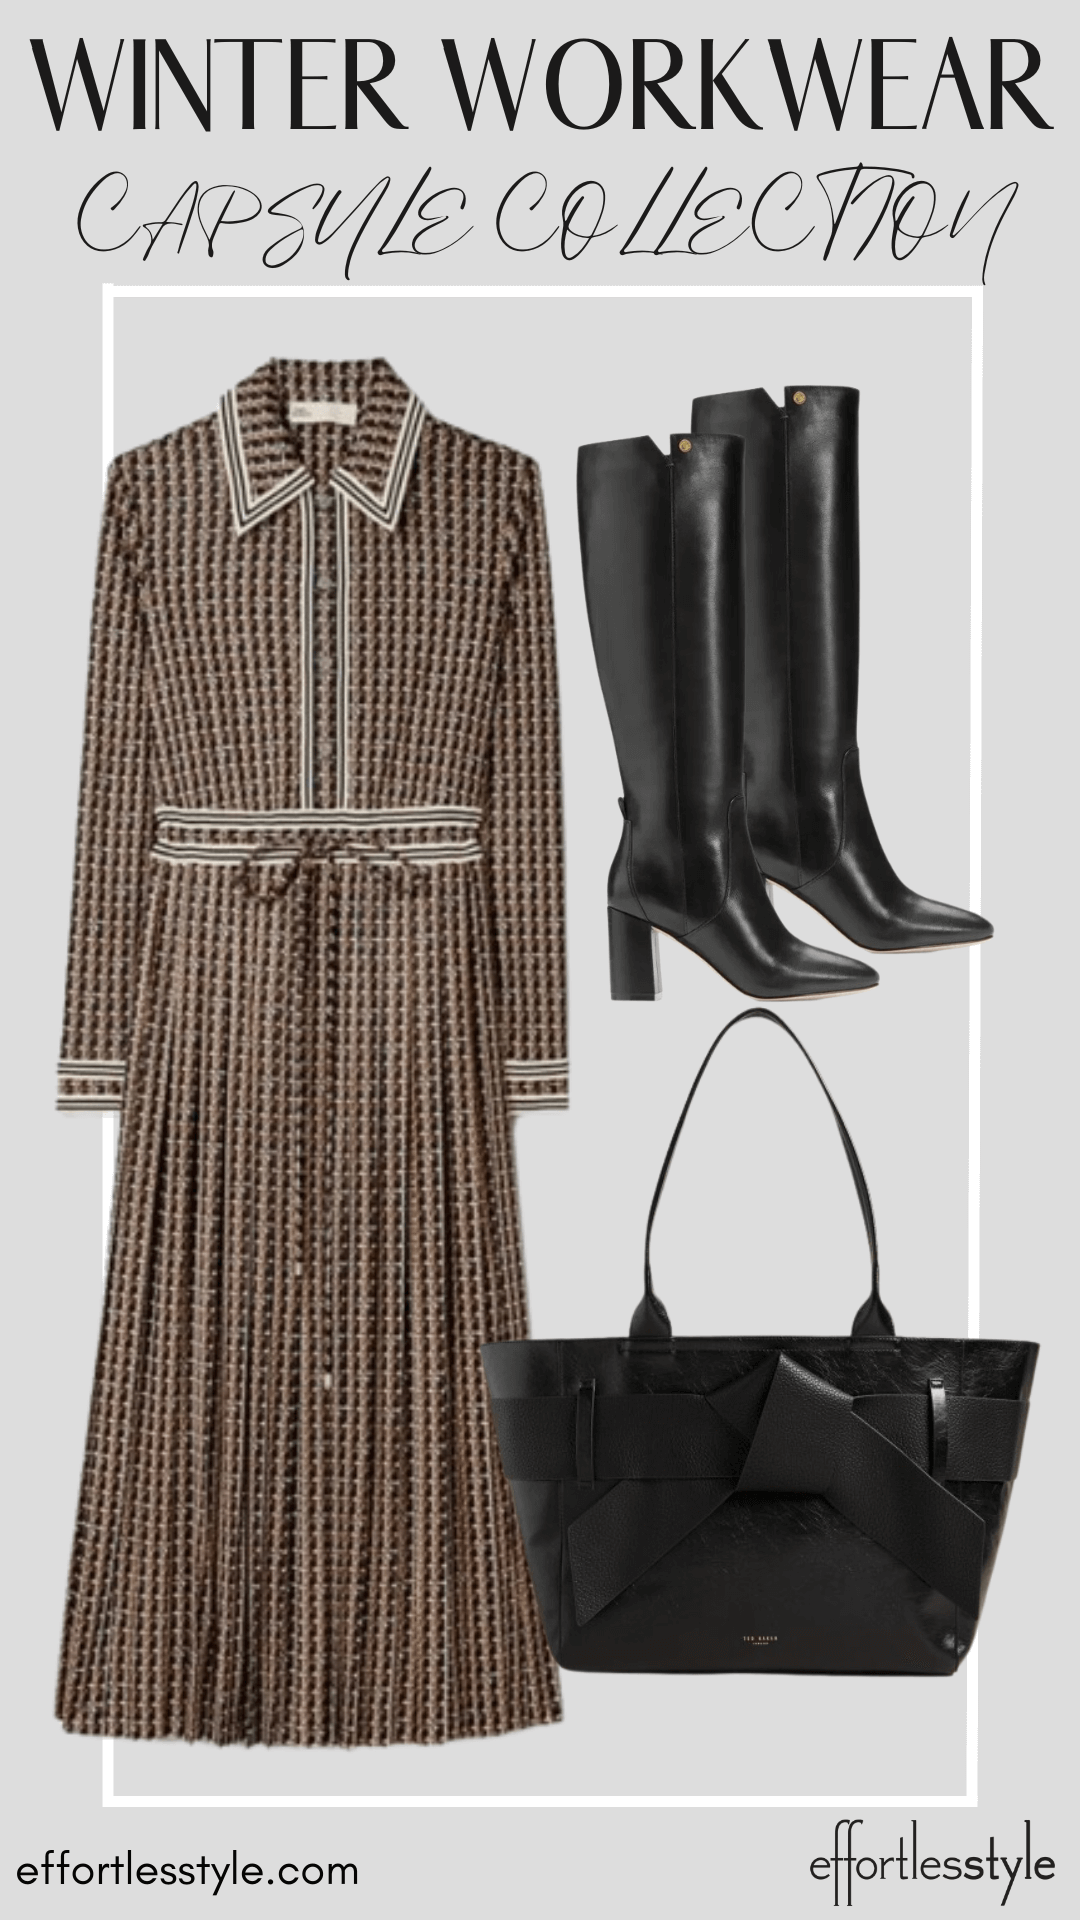 How To Wear Our Winter Workwear Capsule Wardrobe - Part 2 Shirtdress & Black Boot how to style a tall boot with a long dress fun ways to wear a tall boot the tall boot trend how to wear a shirtdress to the office